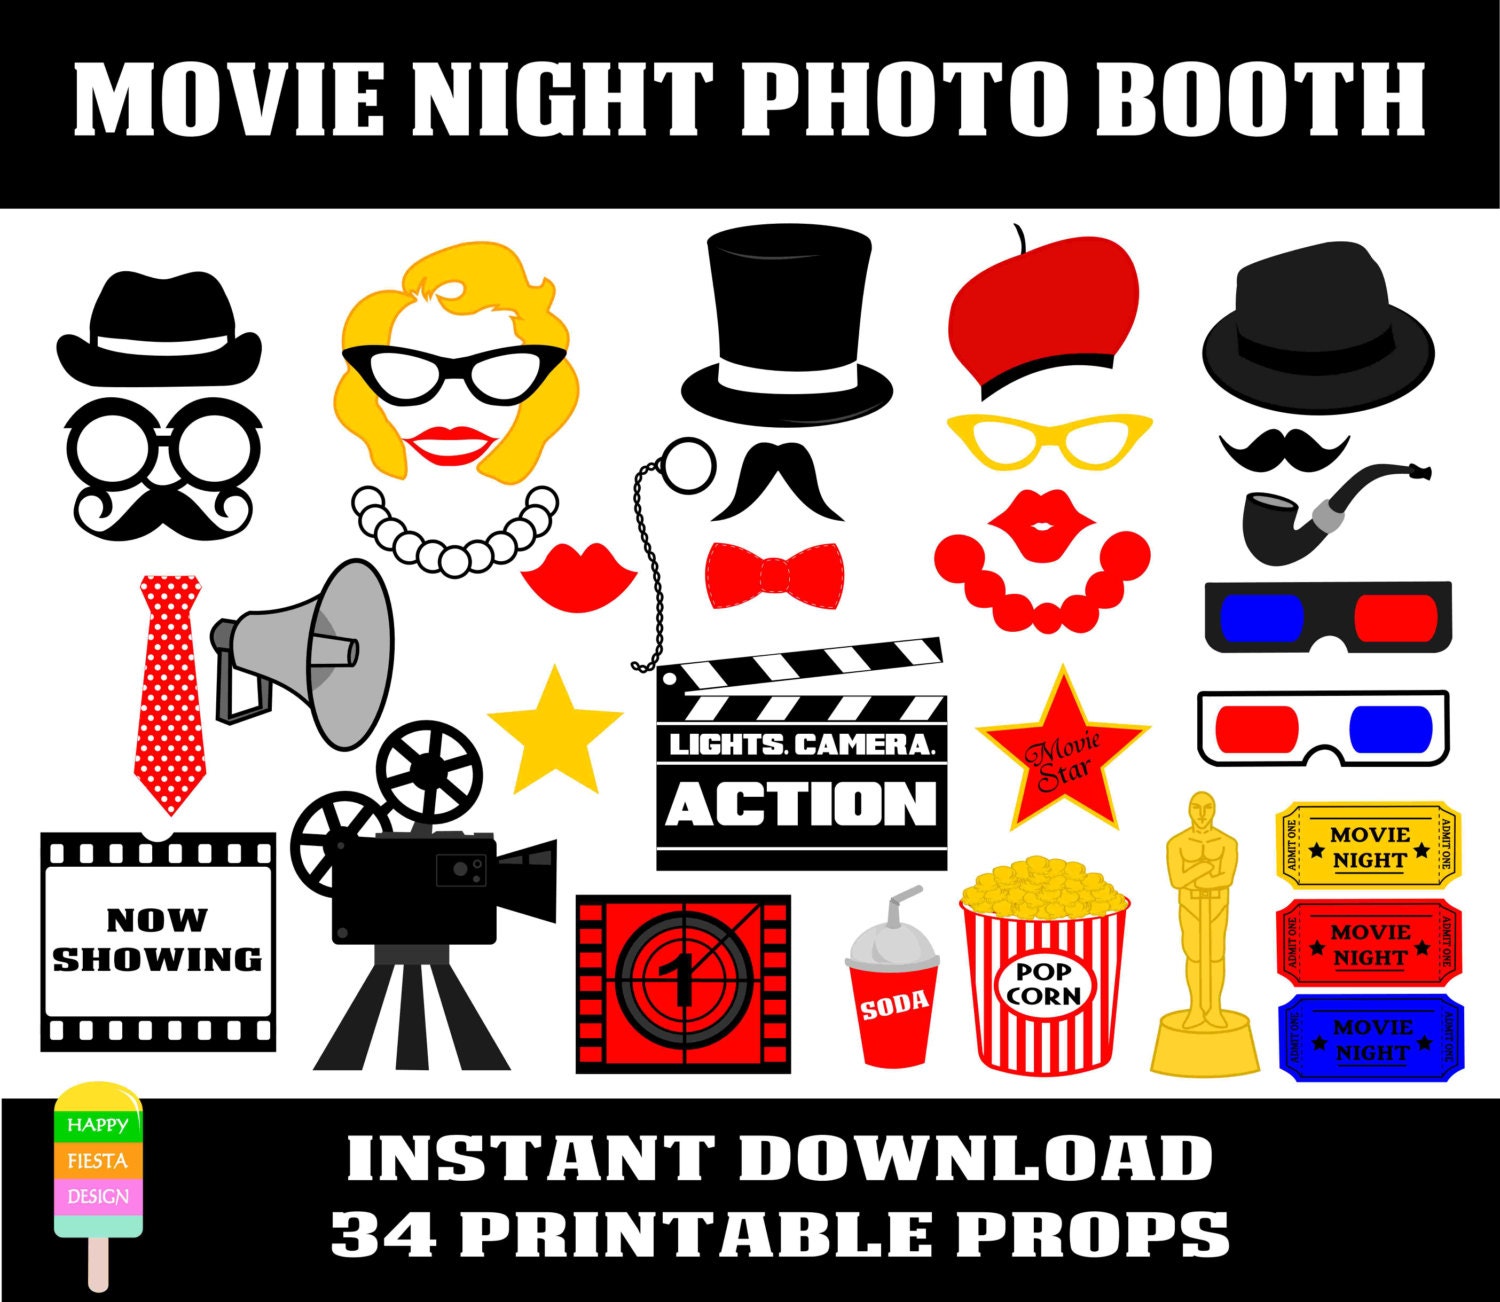 movie props photo themed booth Props Photo Pieces37 Booth HappyFiestaDesign Night 46 Movie by